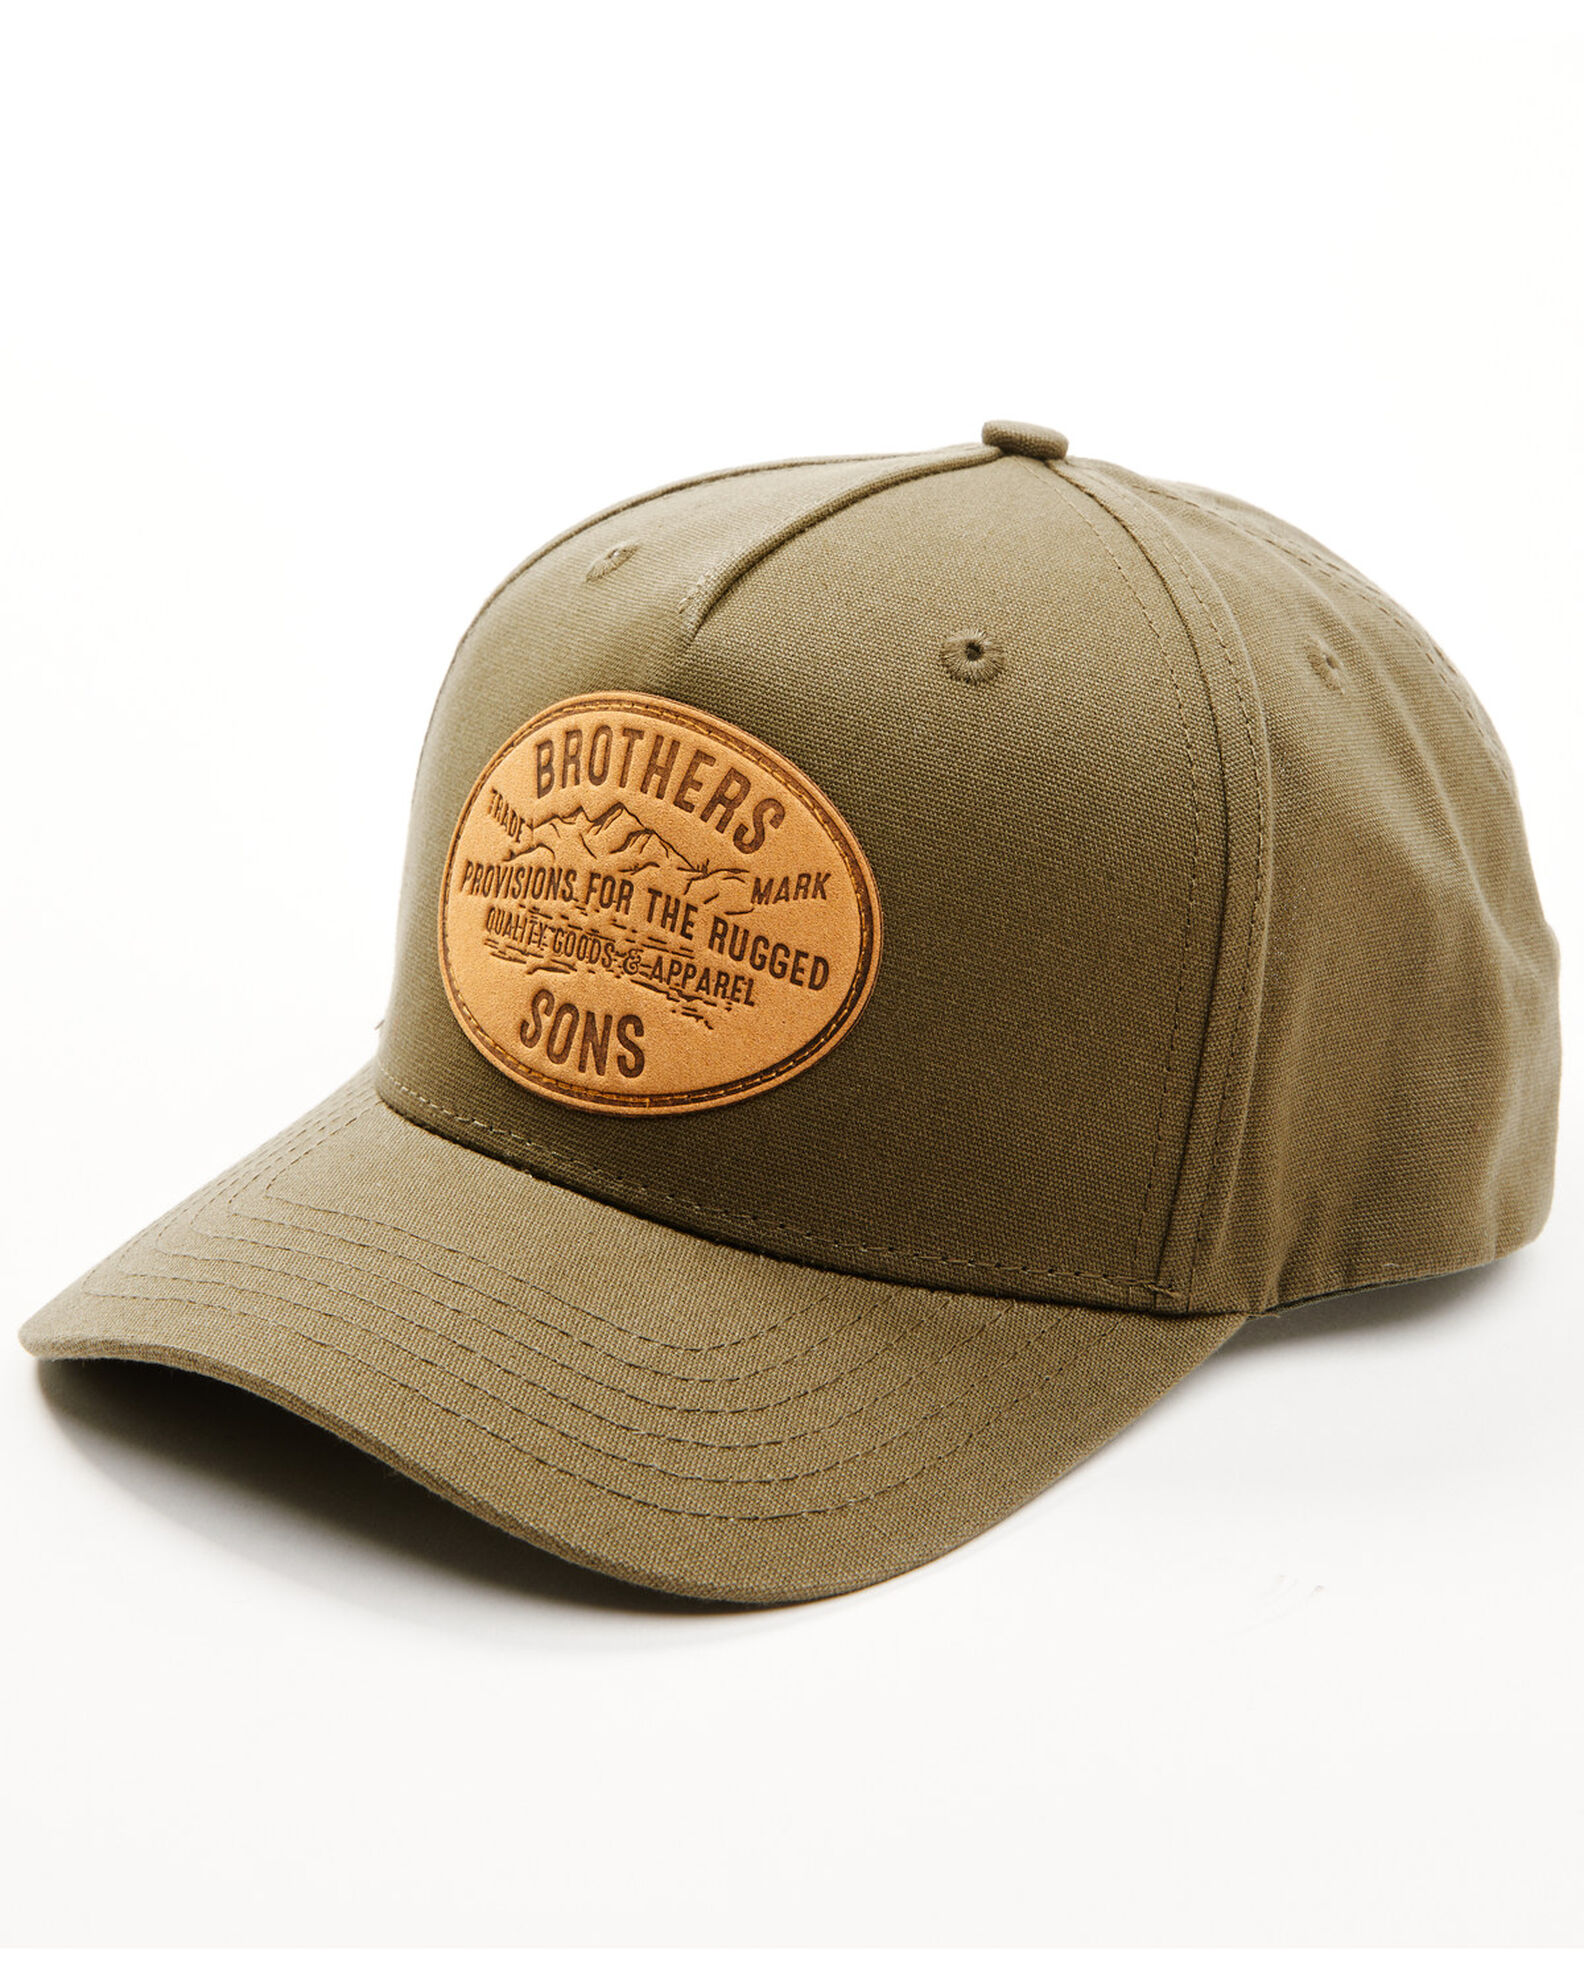 Brothers & Sons Men's Provisions For The Rugged Leather Patch Baseball Cap